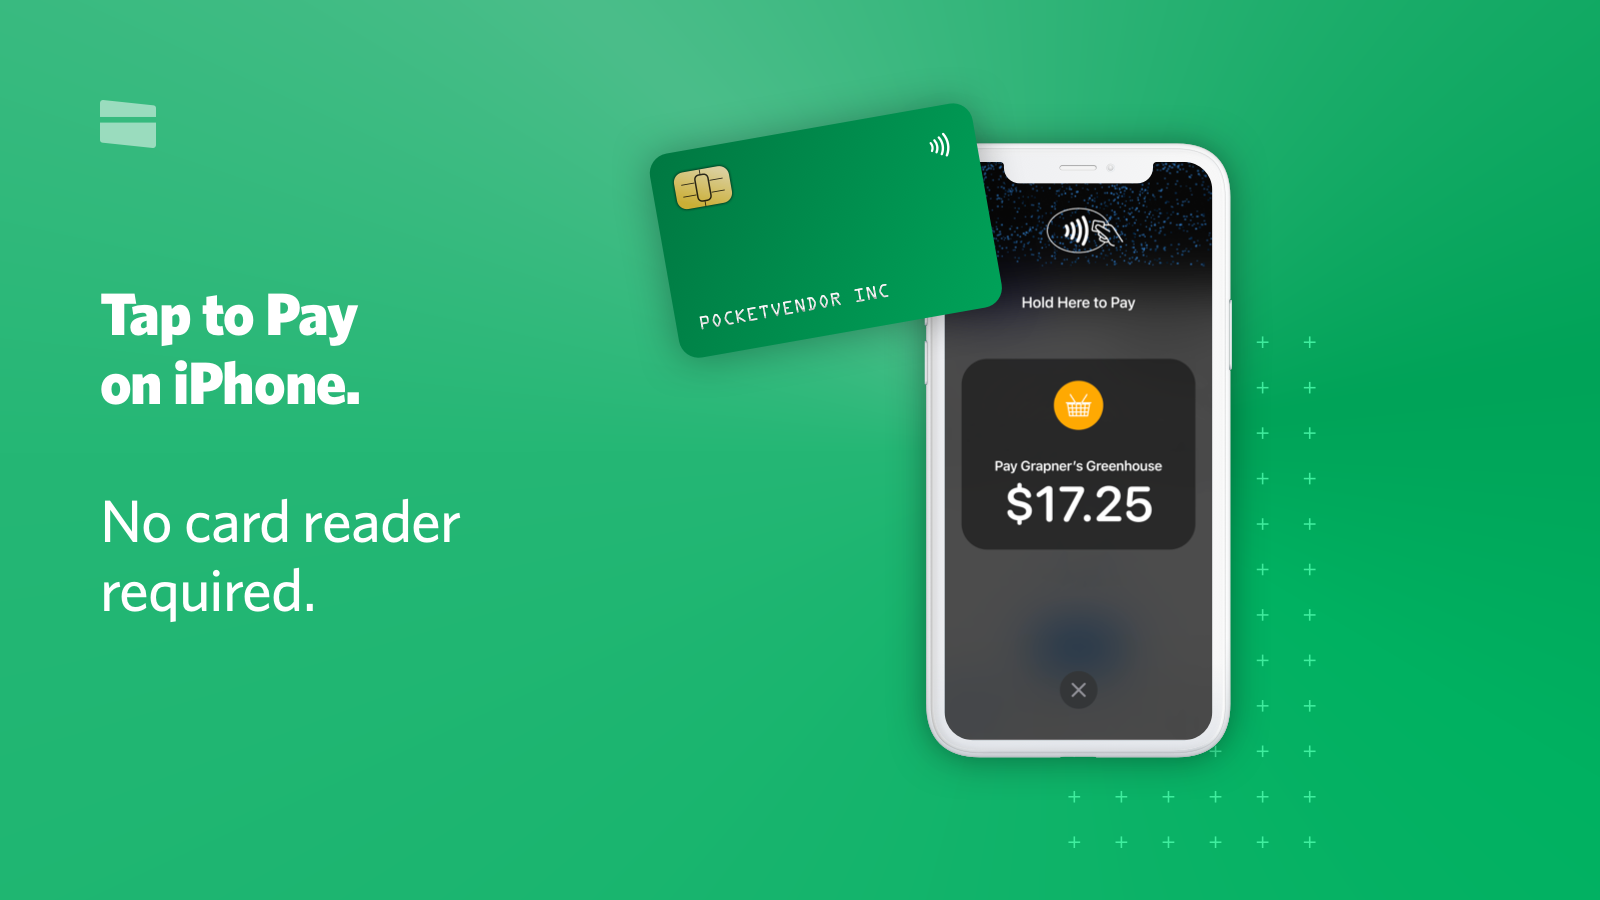 No card reader? Enable Tap to Pay on iPhone for contactless payments.